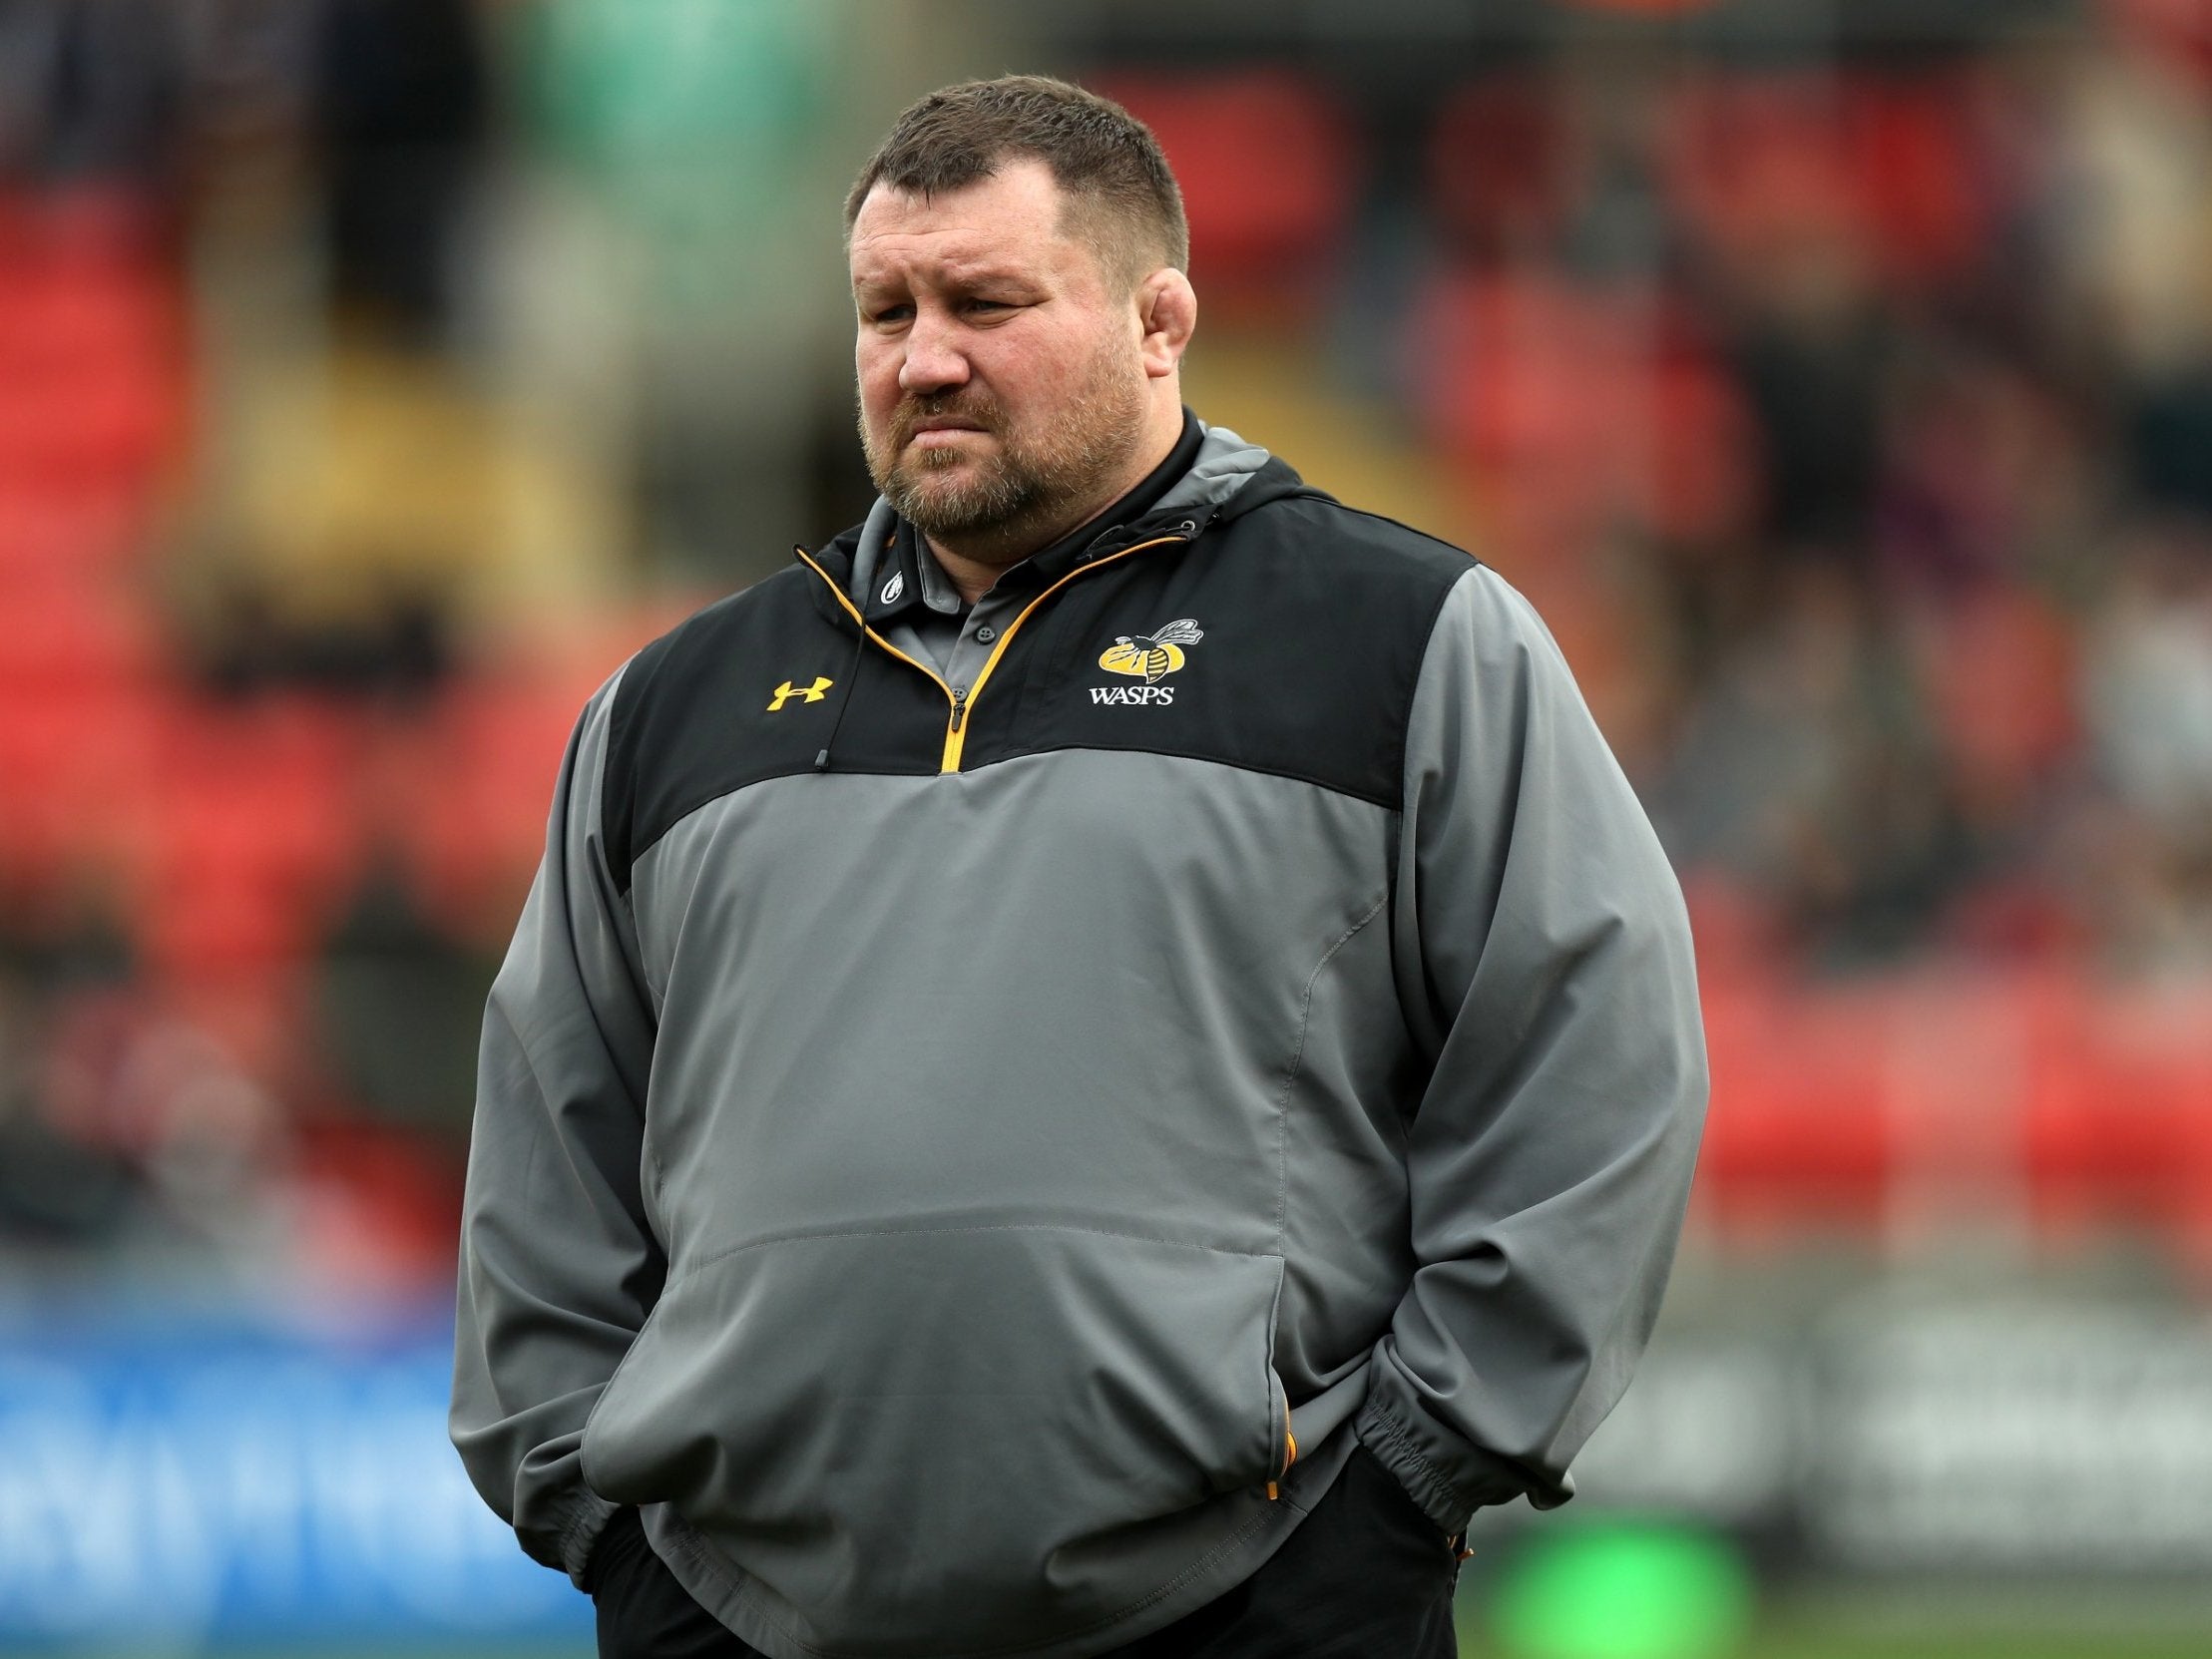 Dai Young revealed that Wasps have spoken to Shaun Edwards about returning to the club